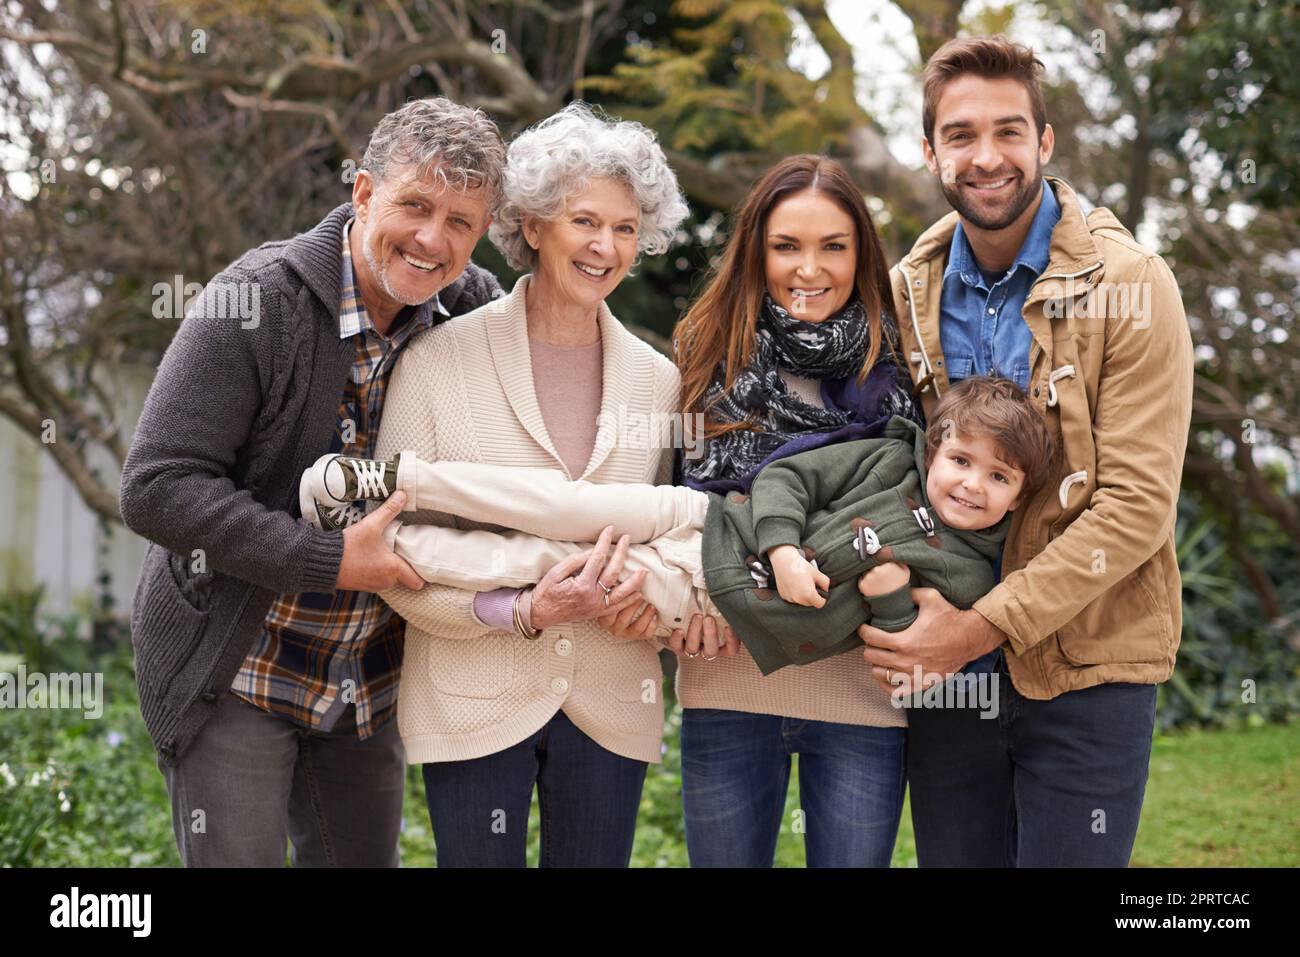 Hes all the joy we need. A multi-generation family standing outdoors. Stock Photo